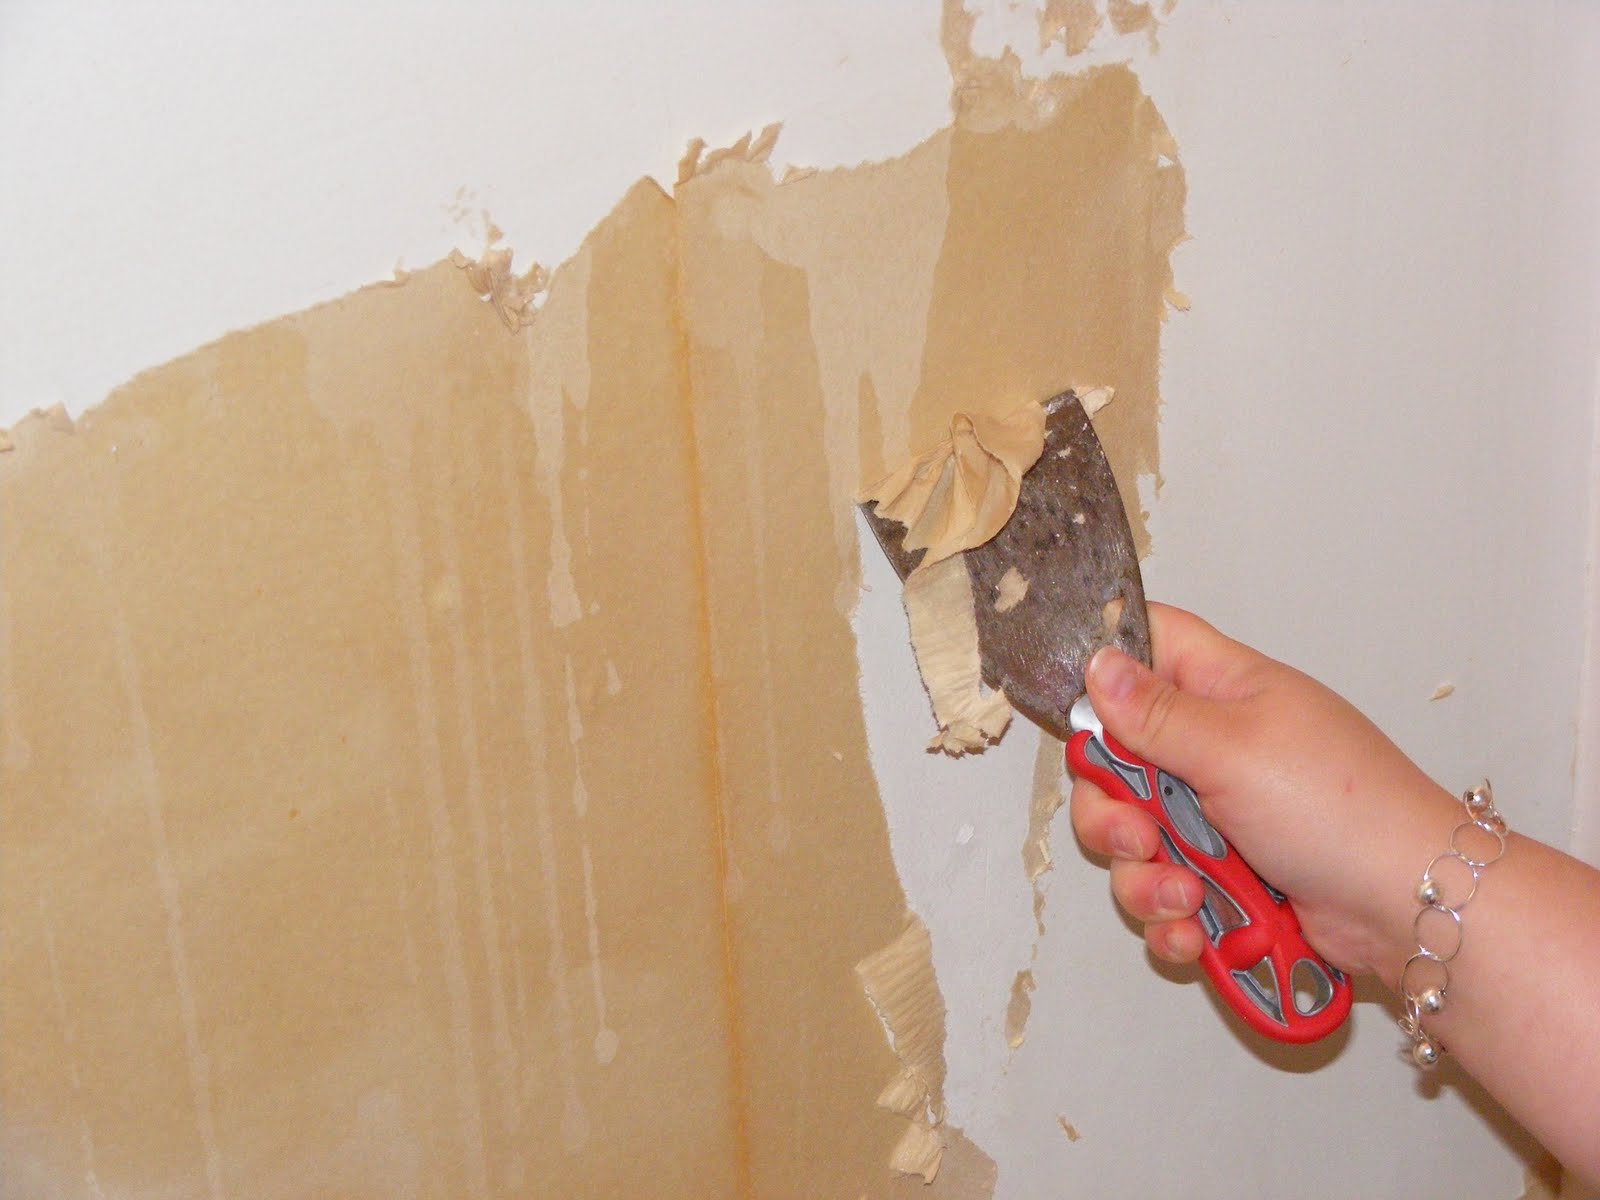 Southern Comfort: The Long-Awaited Wallpaper Removal Post